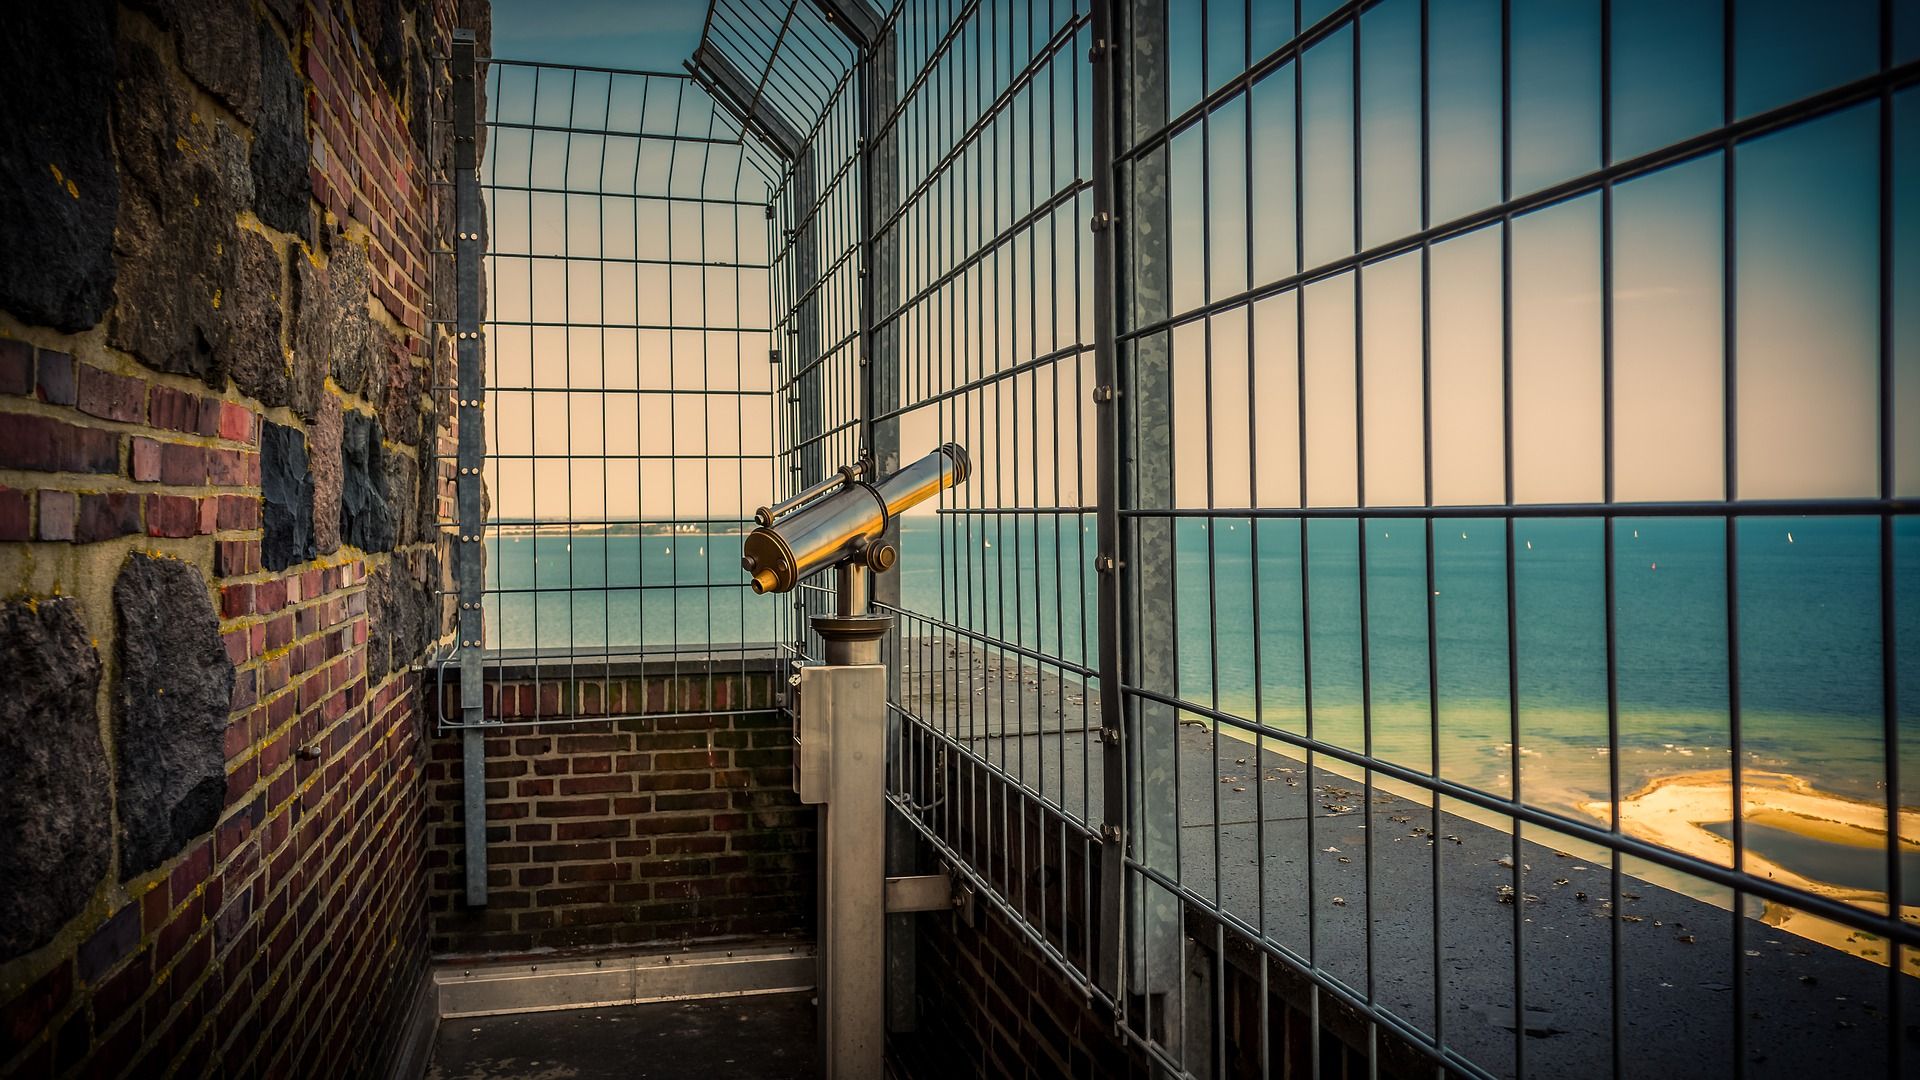 Telescope behind a wire grill pointing at the ocean